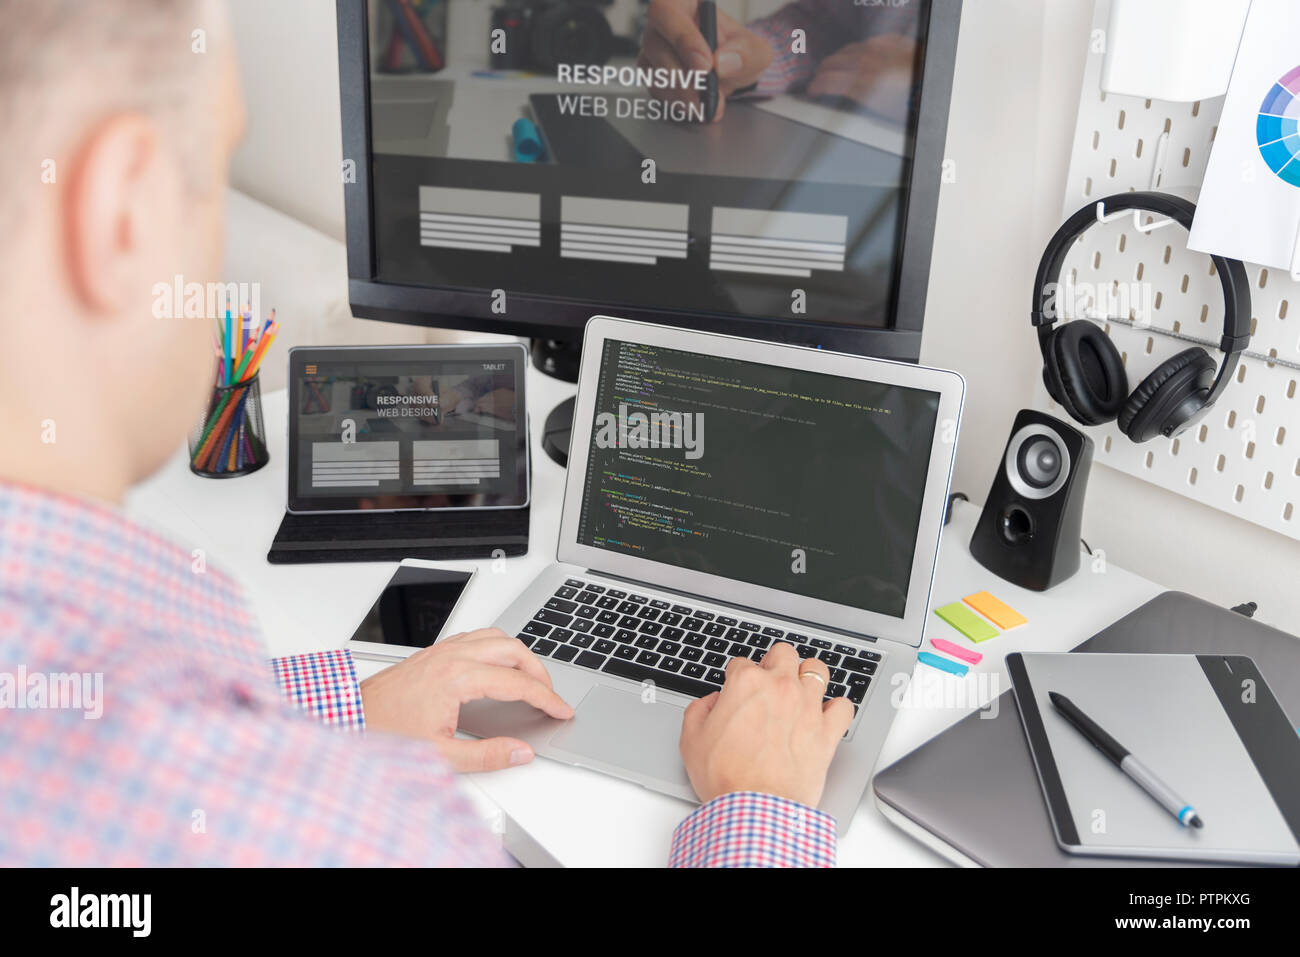 Programmer working on the code. IT specialist codes the responsive website Stock Photo